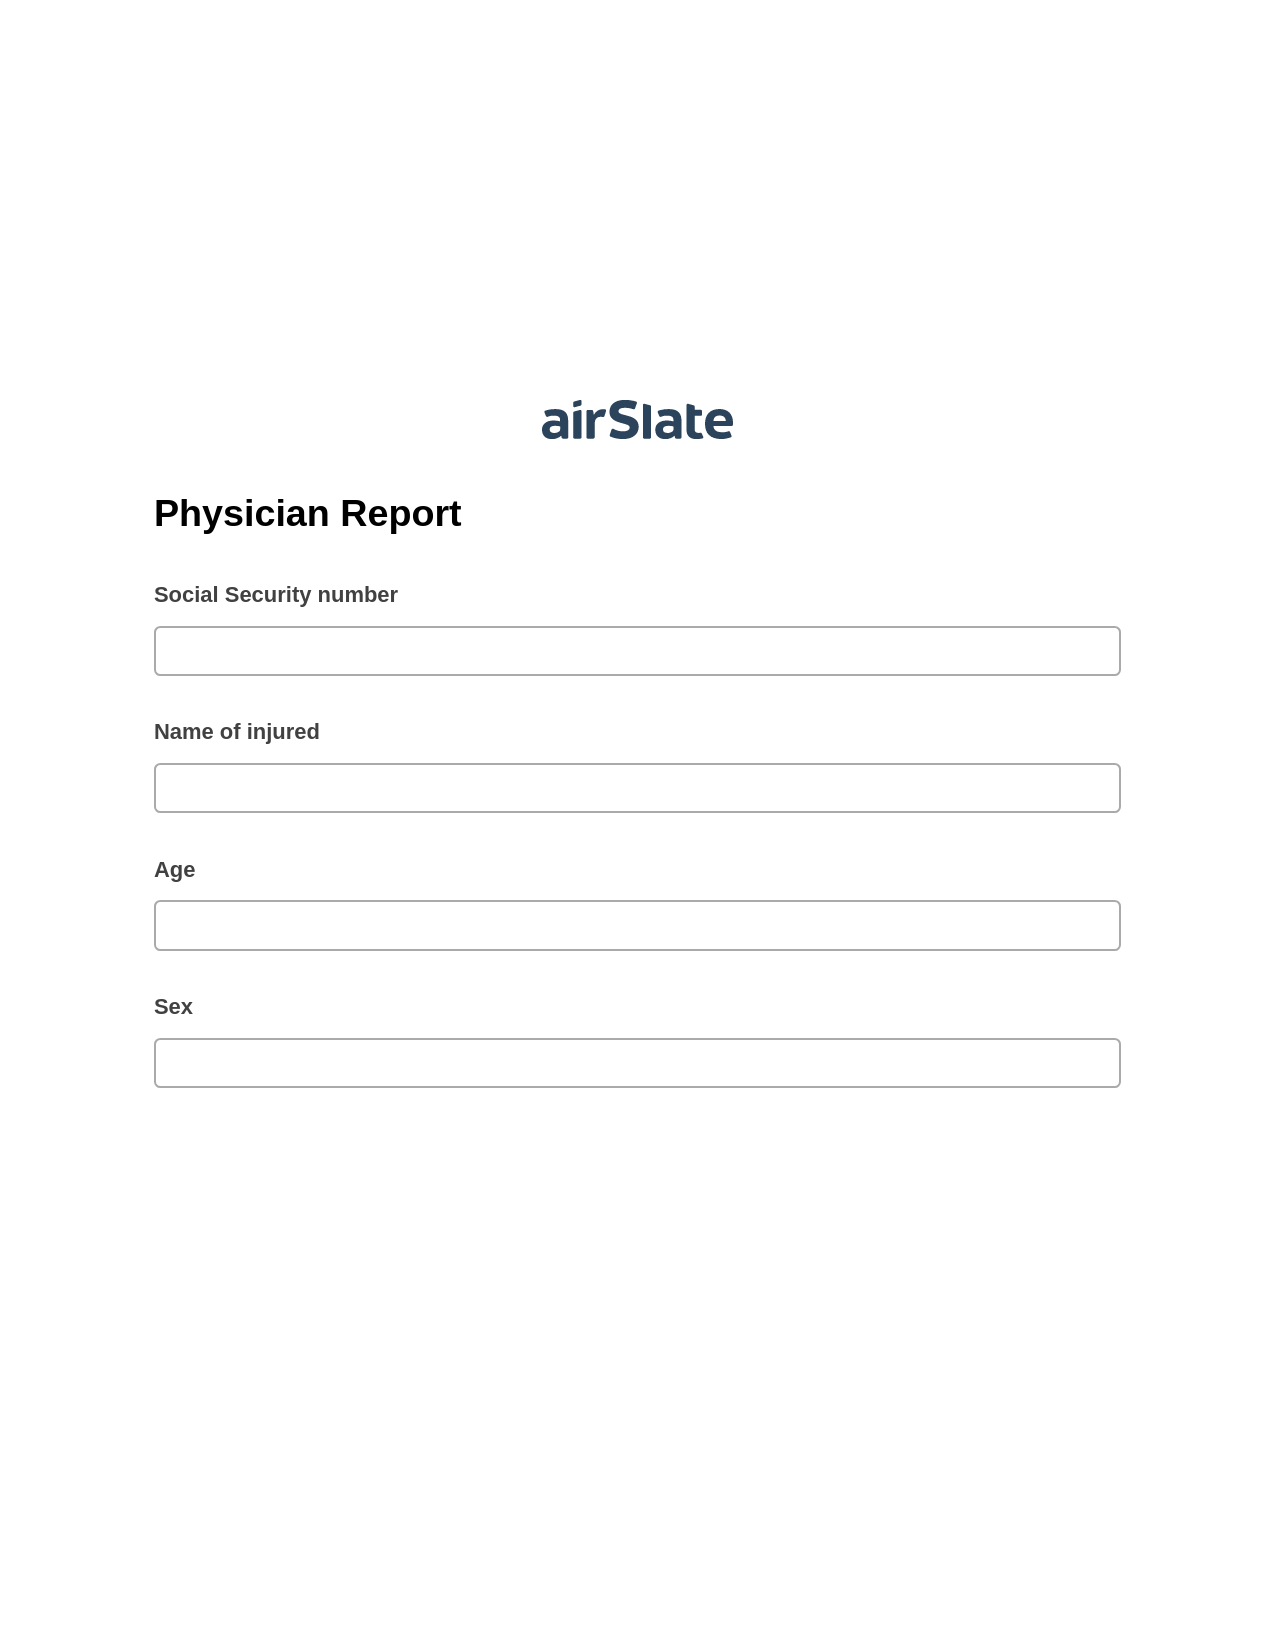 Multirole Physician Report Pre-fill from CSV File Bot, Remove Slate Bot, Post-finish Document Bot